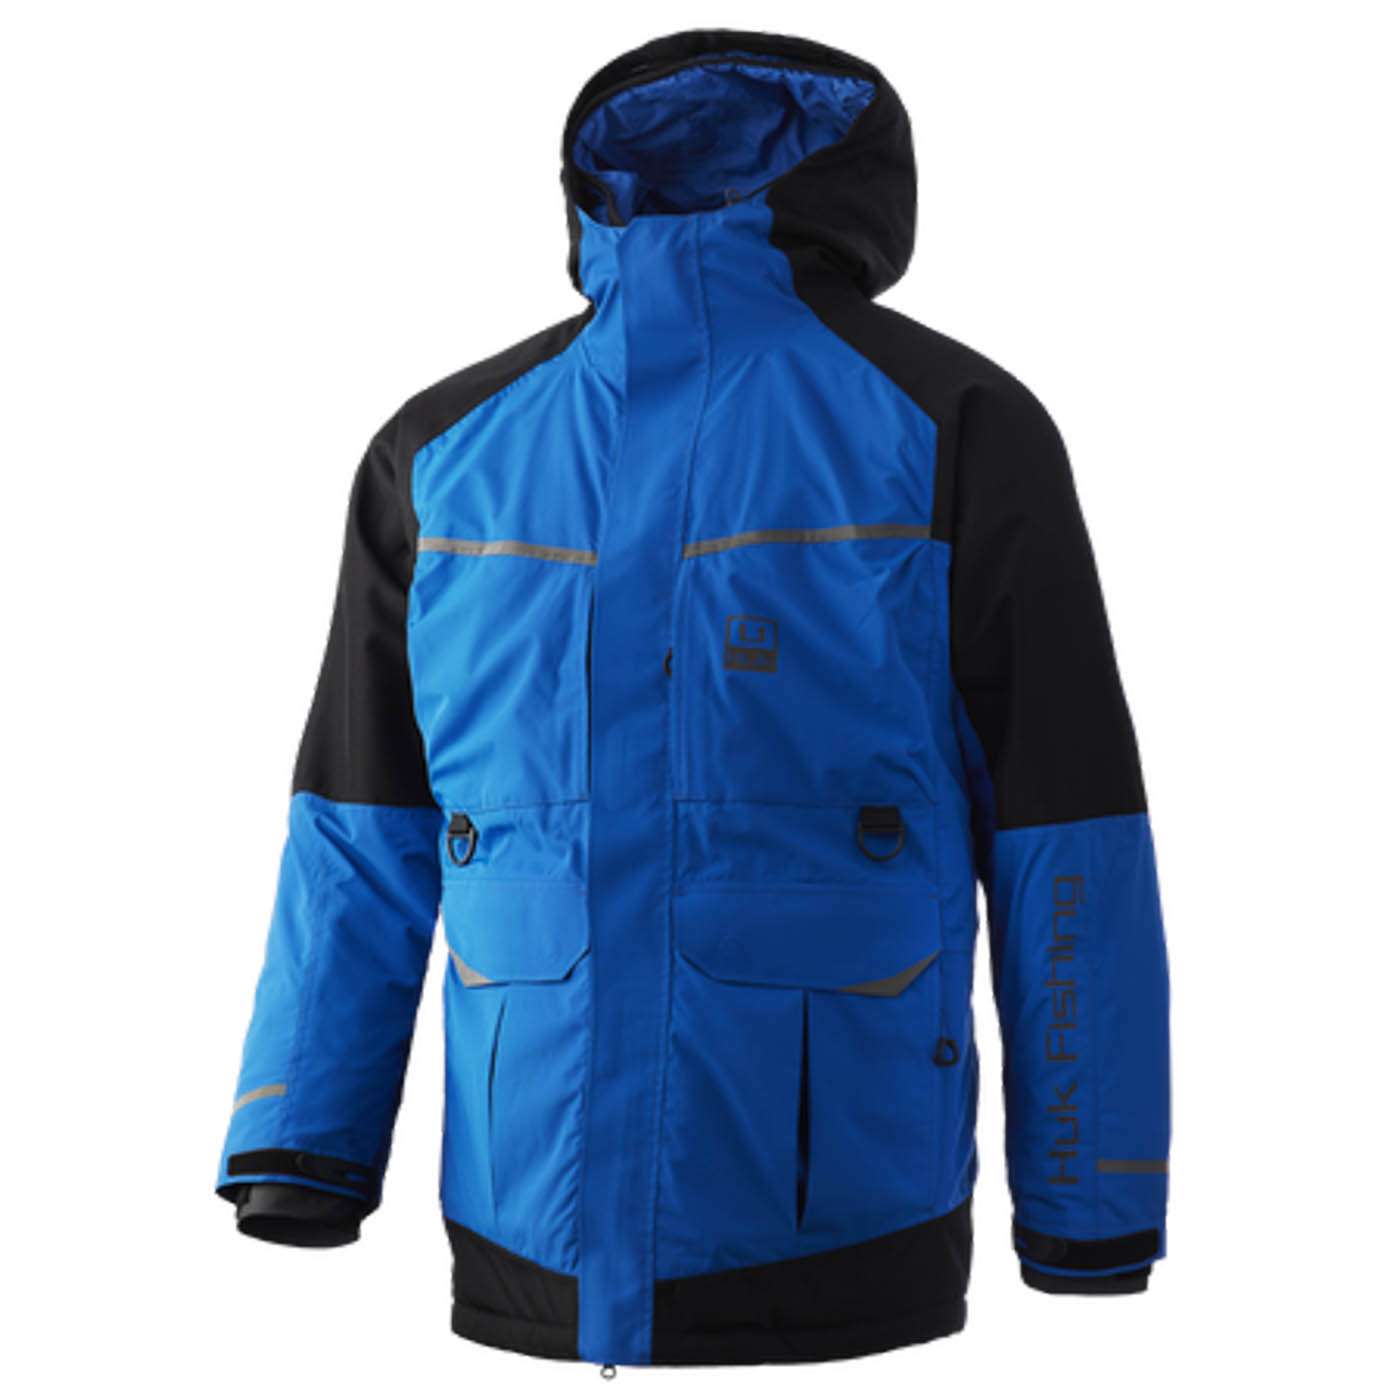 <p><strong>Huk Icon X Superior Jacket</strong></p><p>The Icon X Superior Jacket features Float Technology for added safety. Inserts located in the chest and back offer buoyancy if needed and are easily removable, making the jacket versatile for a number of winter activities. With durable, 100% polyester construction, the jacket is 100% windproof and 100% waterproof. The DWR finish repels water, and the jacket features abrasion-resistant wear areas, a two-piece hood, internal cuff gussets, body-mapped insulation, and magnetic pocket flaps. $290 ($300 for 3XL). <a href=